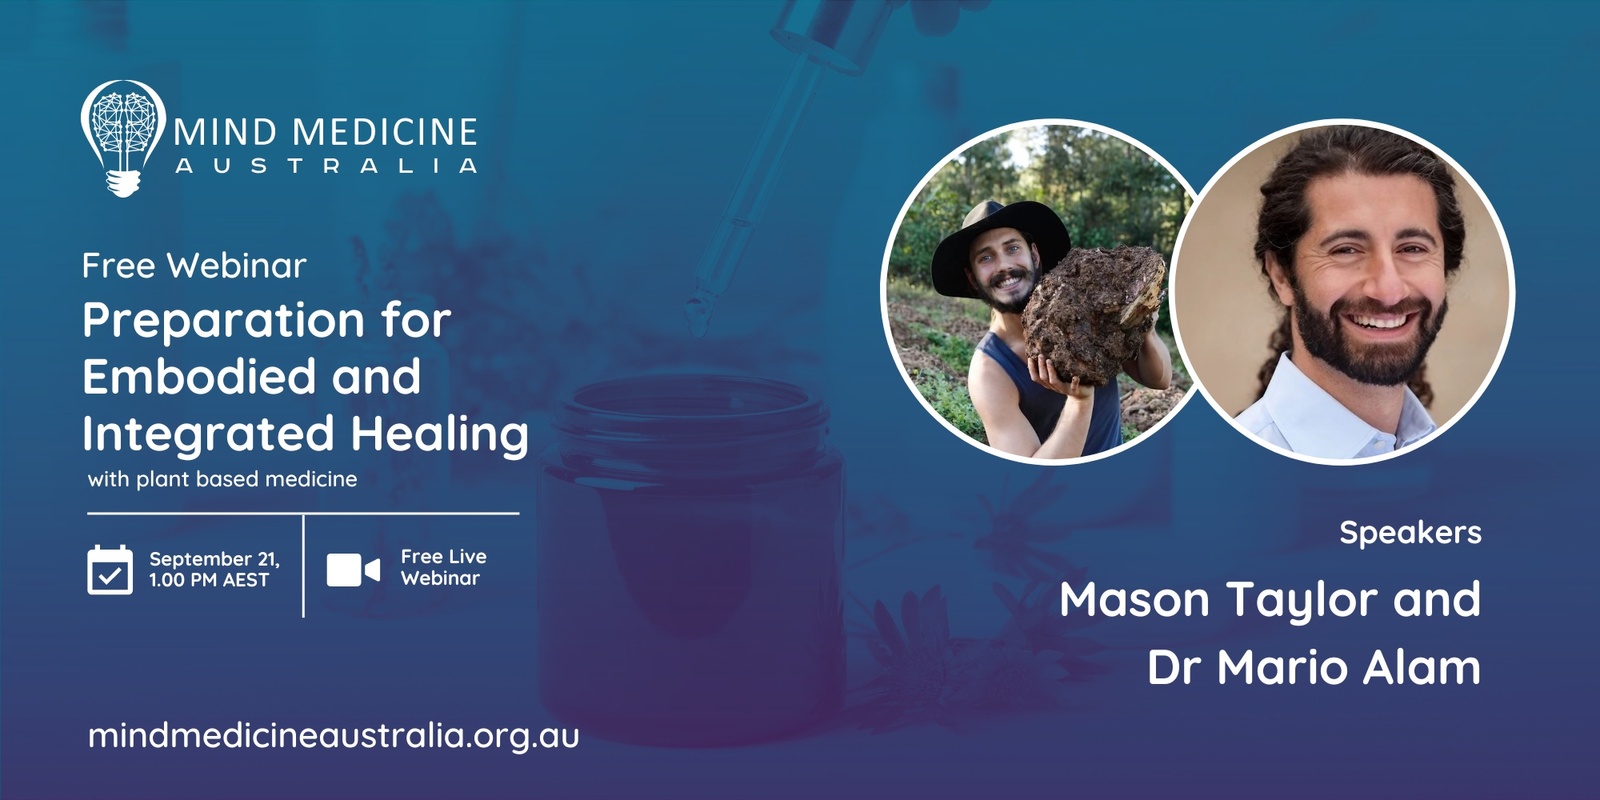 Banner image for Mind Medicine Australia FREE Webinar - Preparation for Embodied and Integrated Healing with Plant Medicines presented by Mason Taylor and Dr Mario Alam